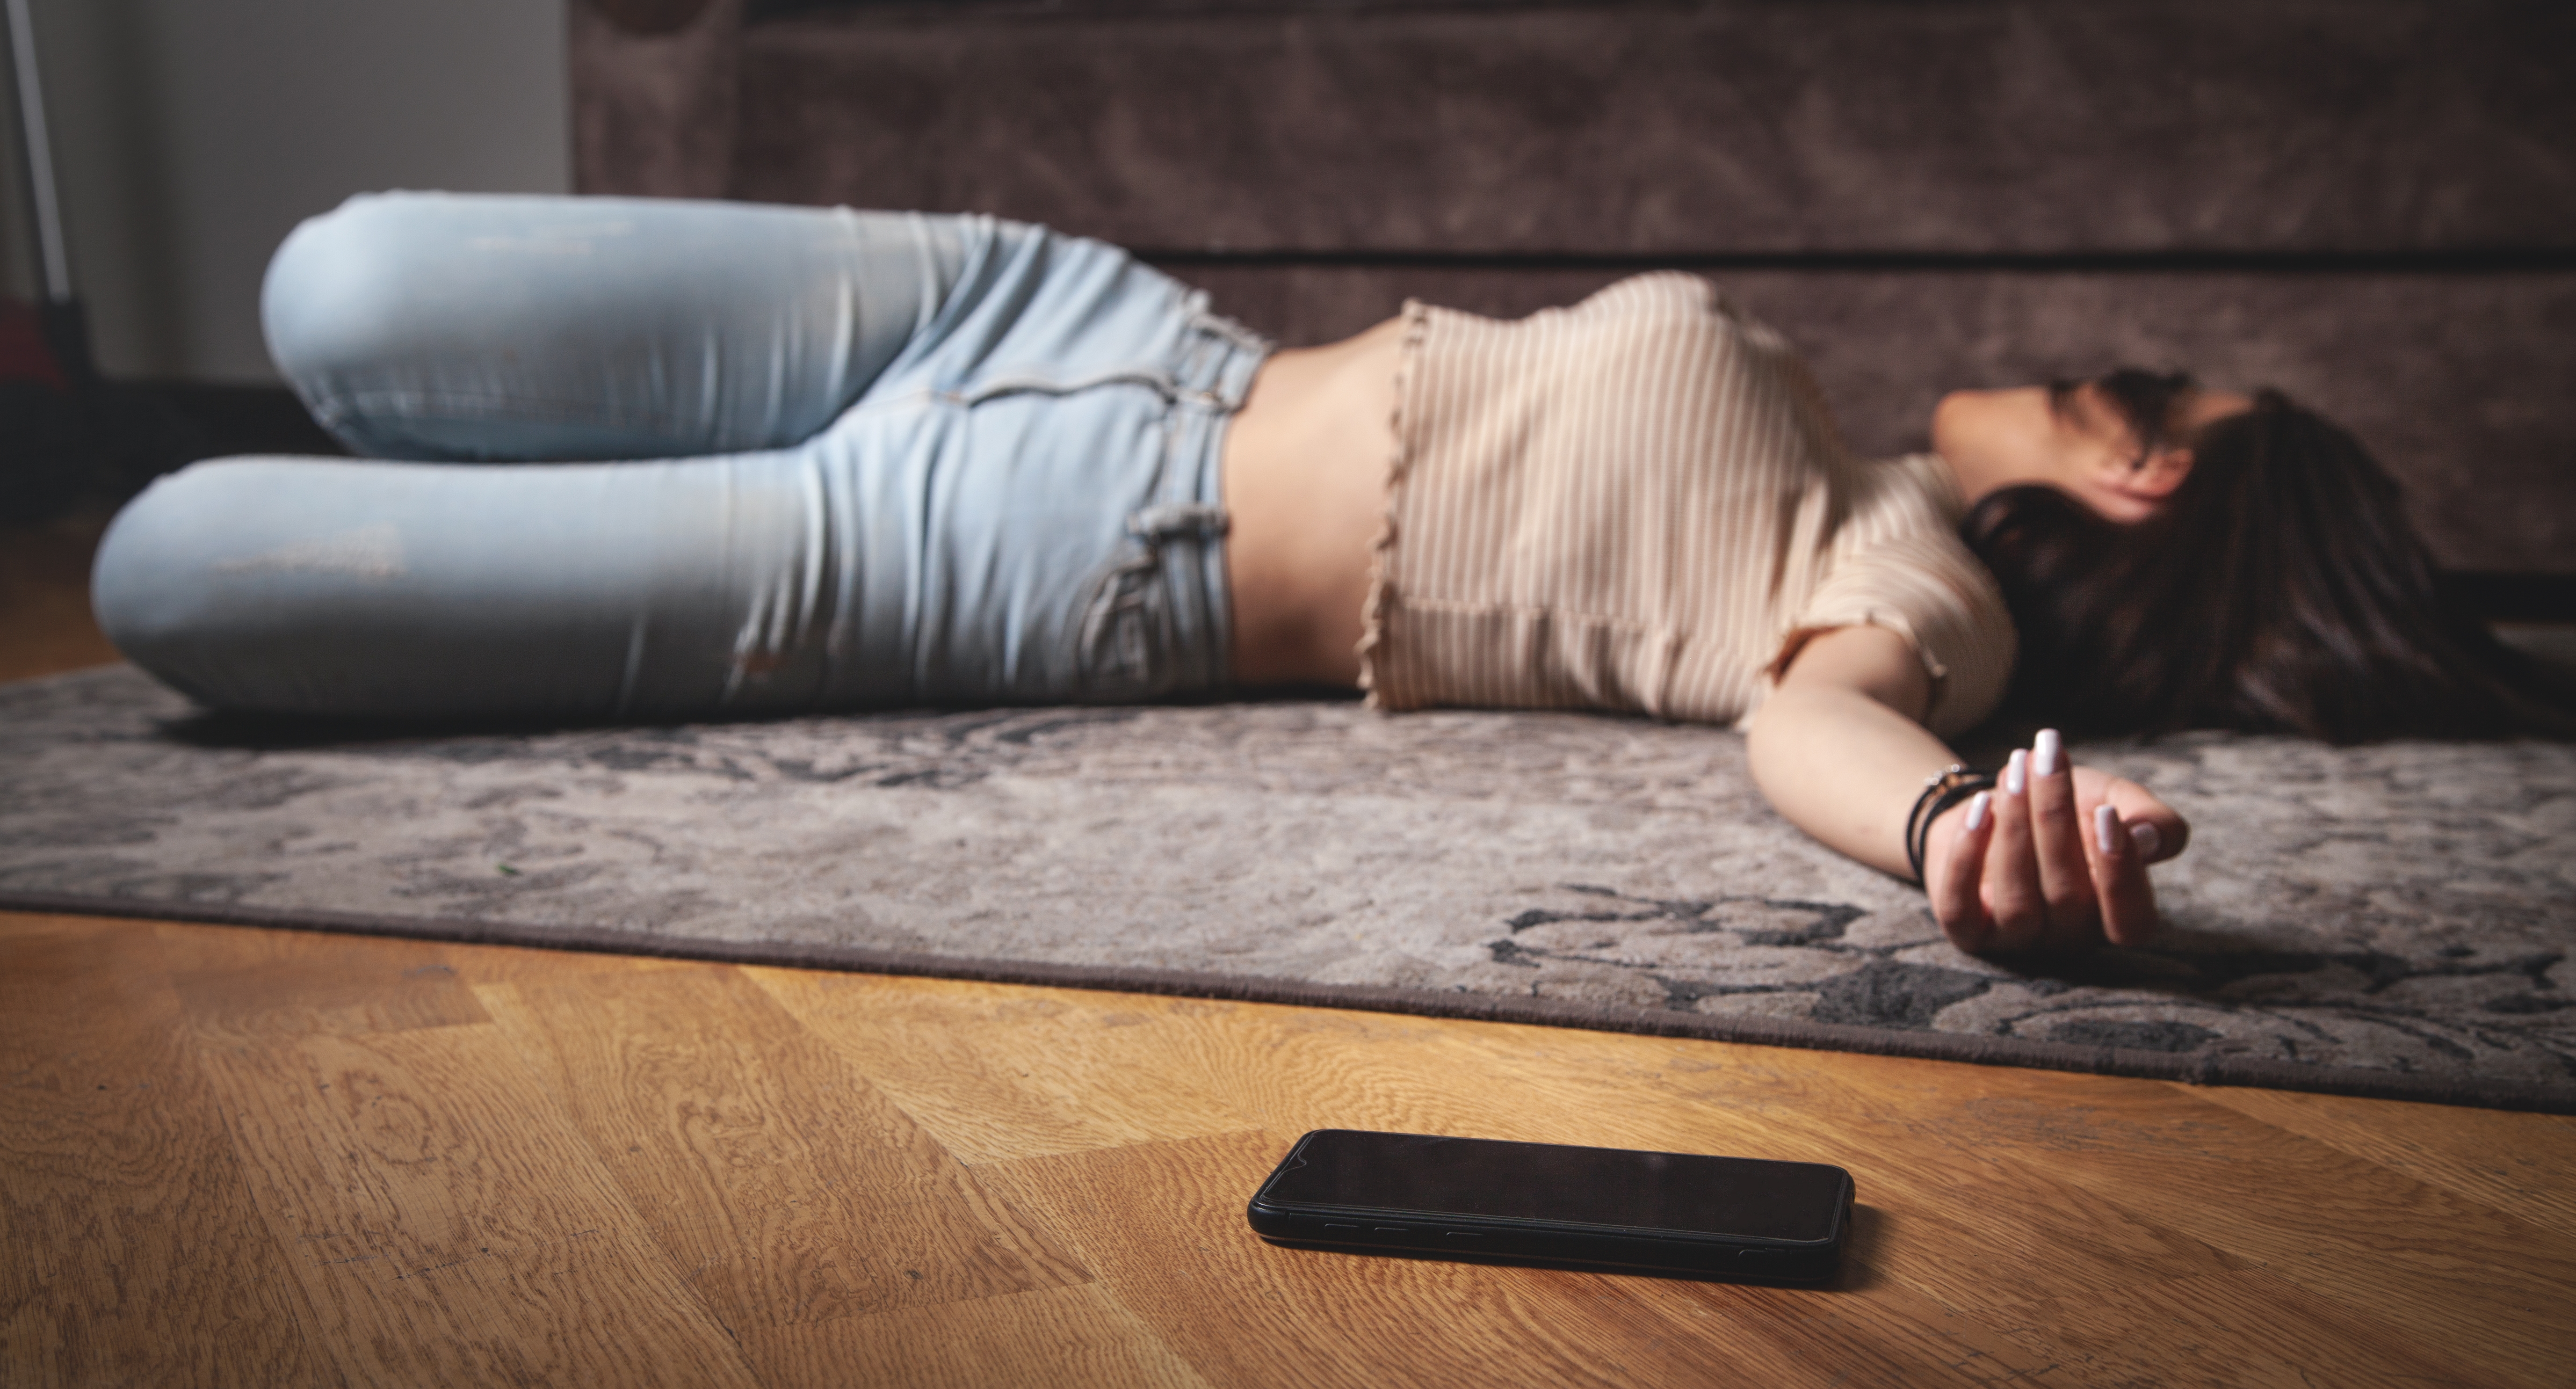 Unconscious young woman lying on floor. | Source: Shutterstock